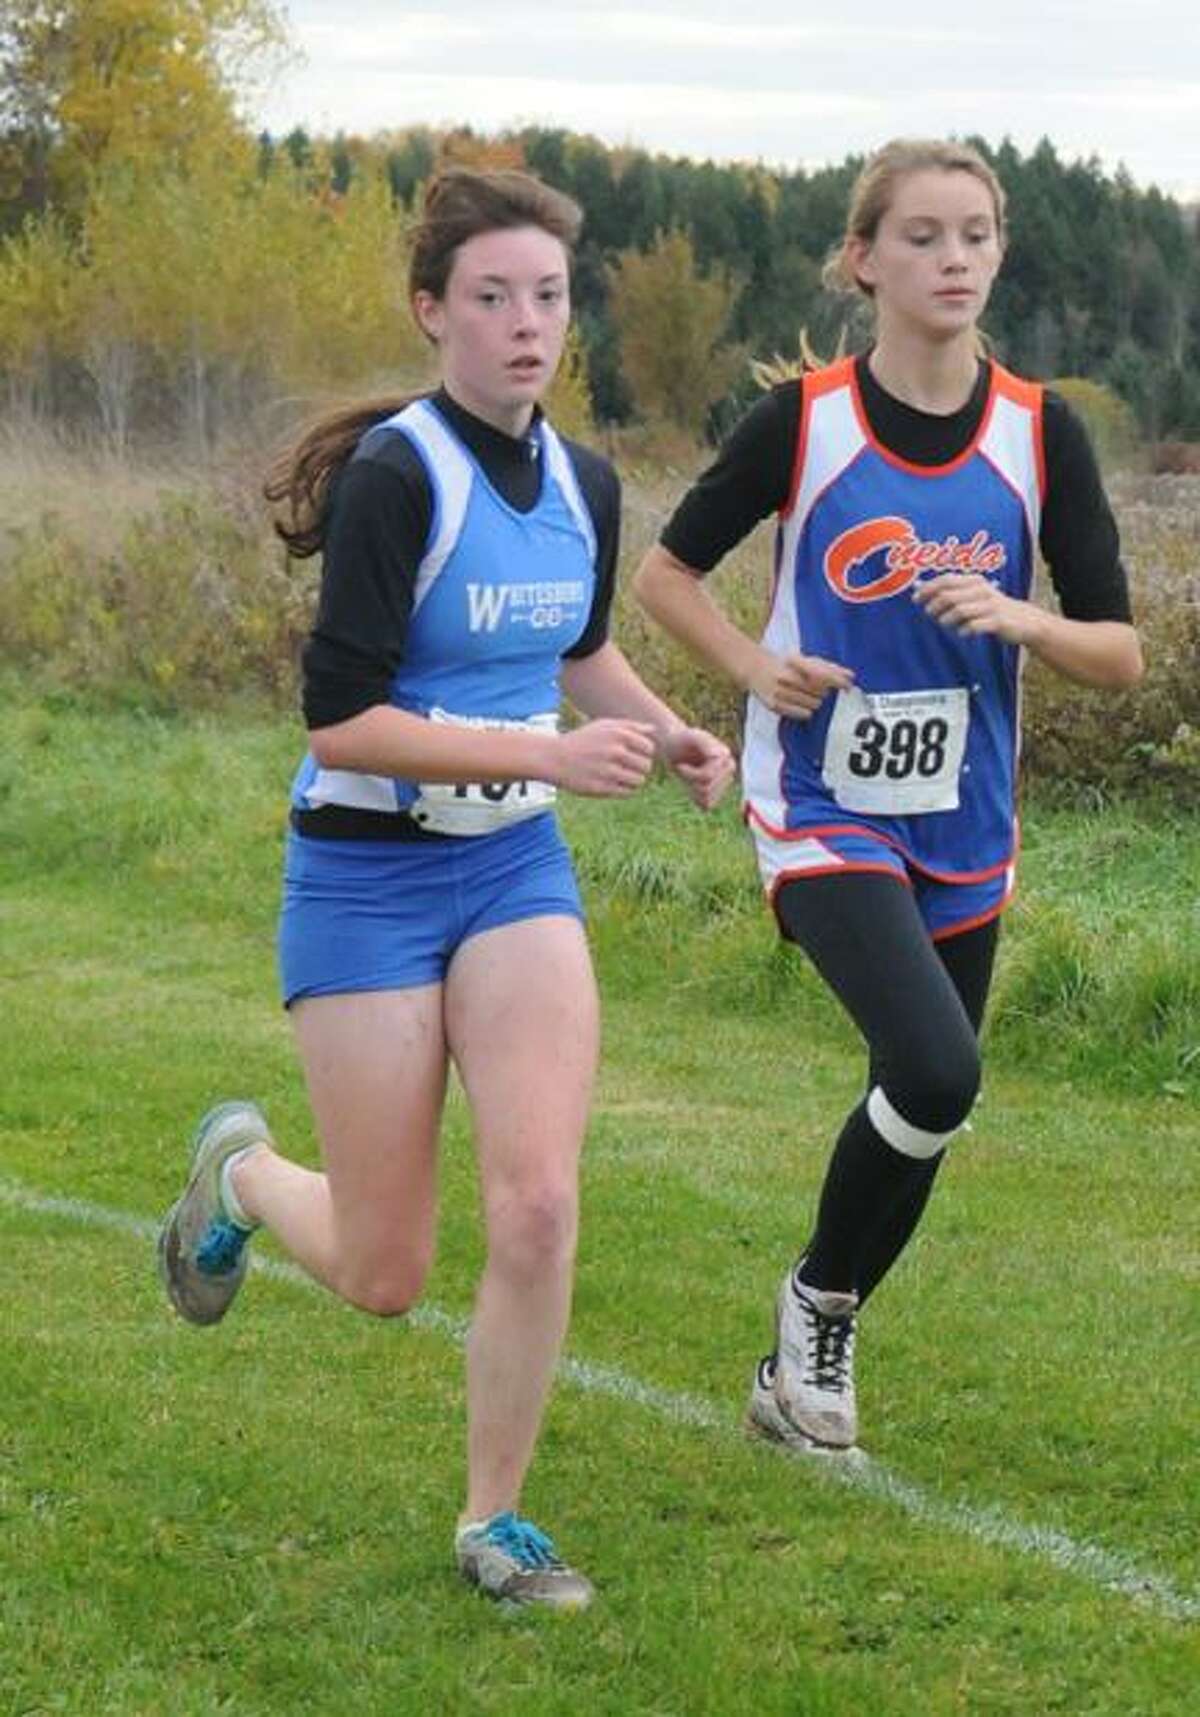 Submitted Photo by Ryan Orilio Oneida's Jordan Newton, right, and Whitesboro's Mary Manzari compete in the Tri-Valley League championship meet Tuesday at SUNY IT. Newton placed 11th at the meet with a time of 21:55.